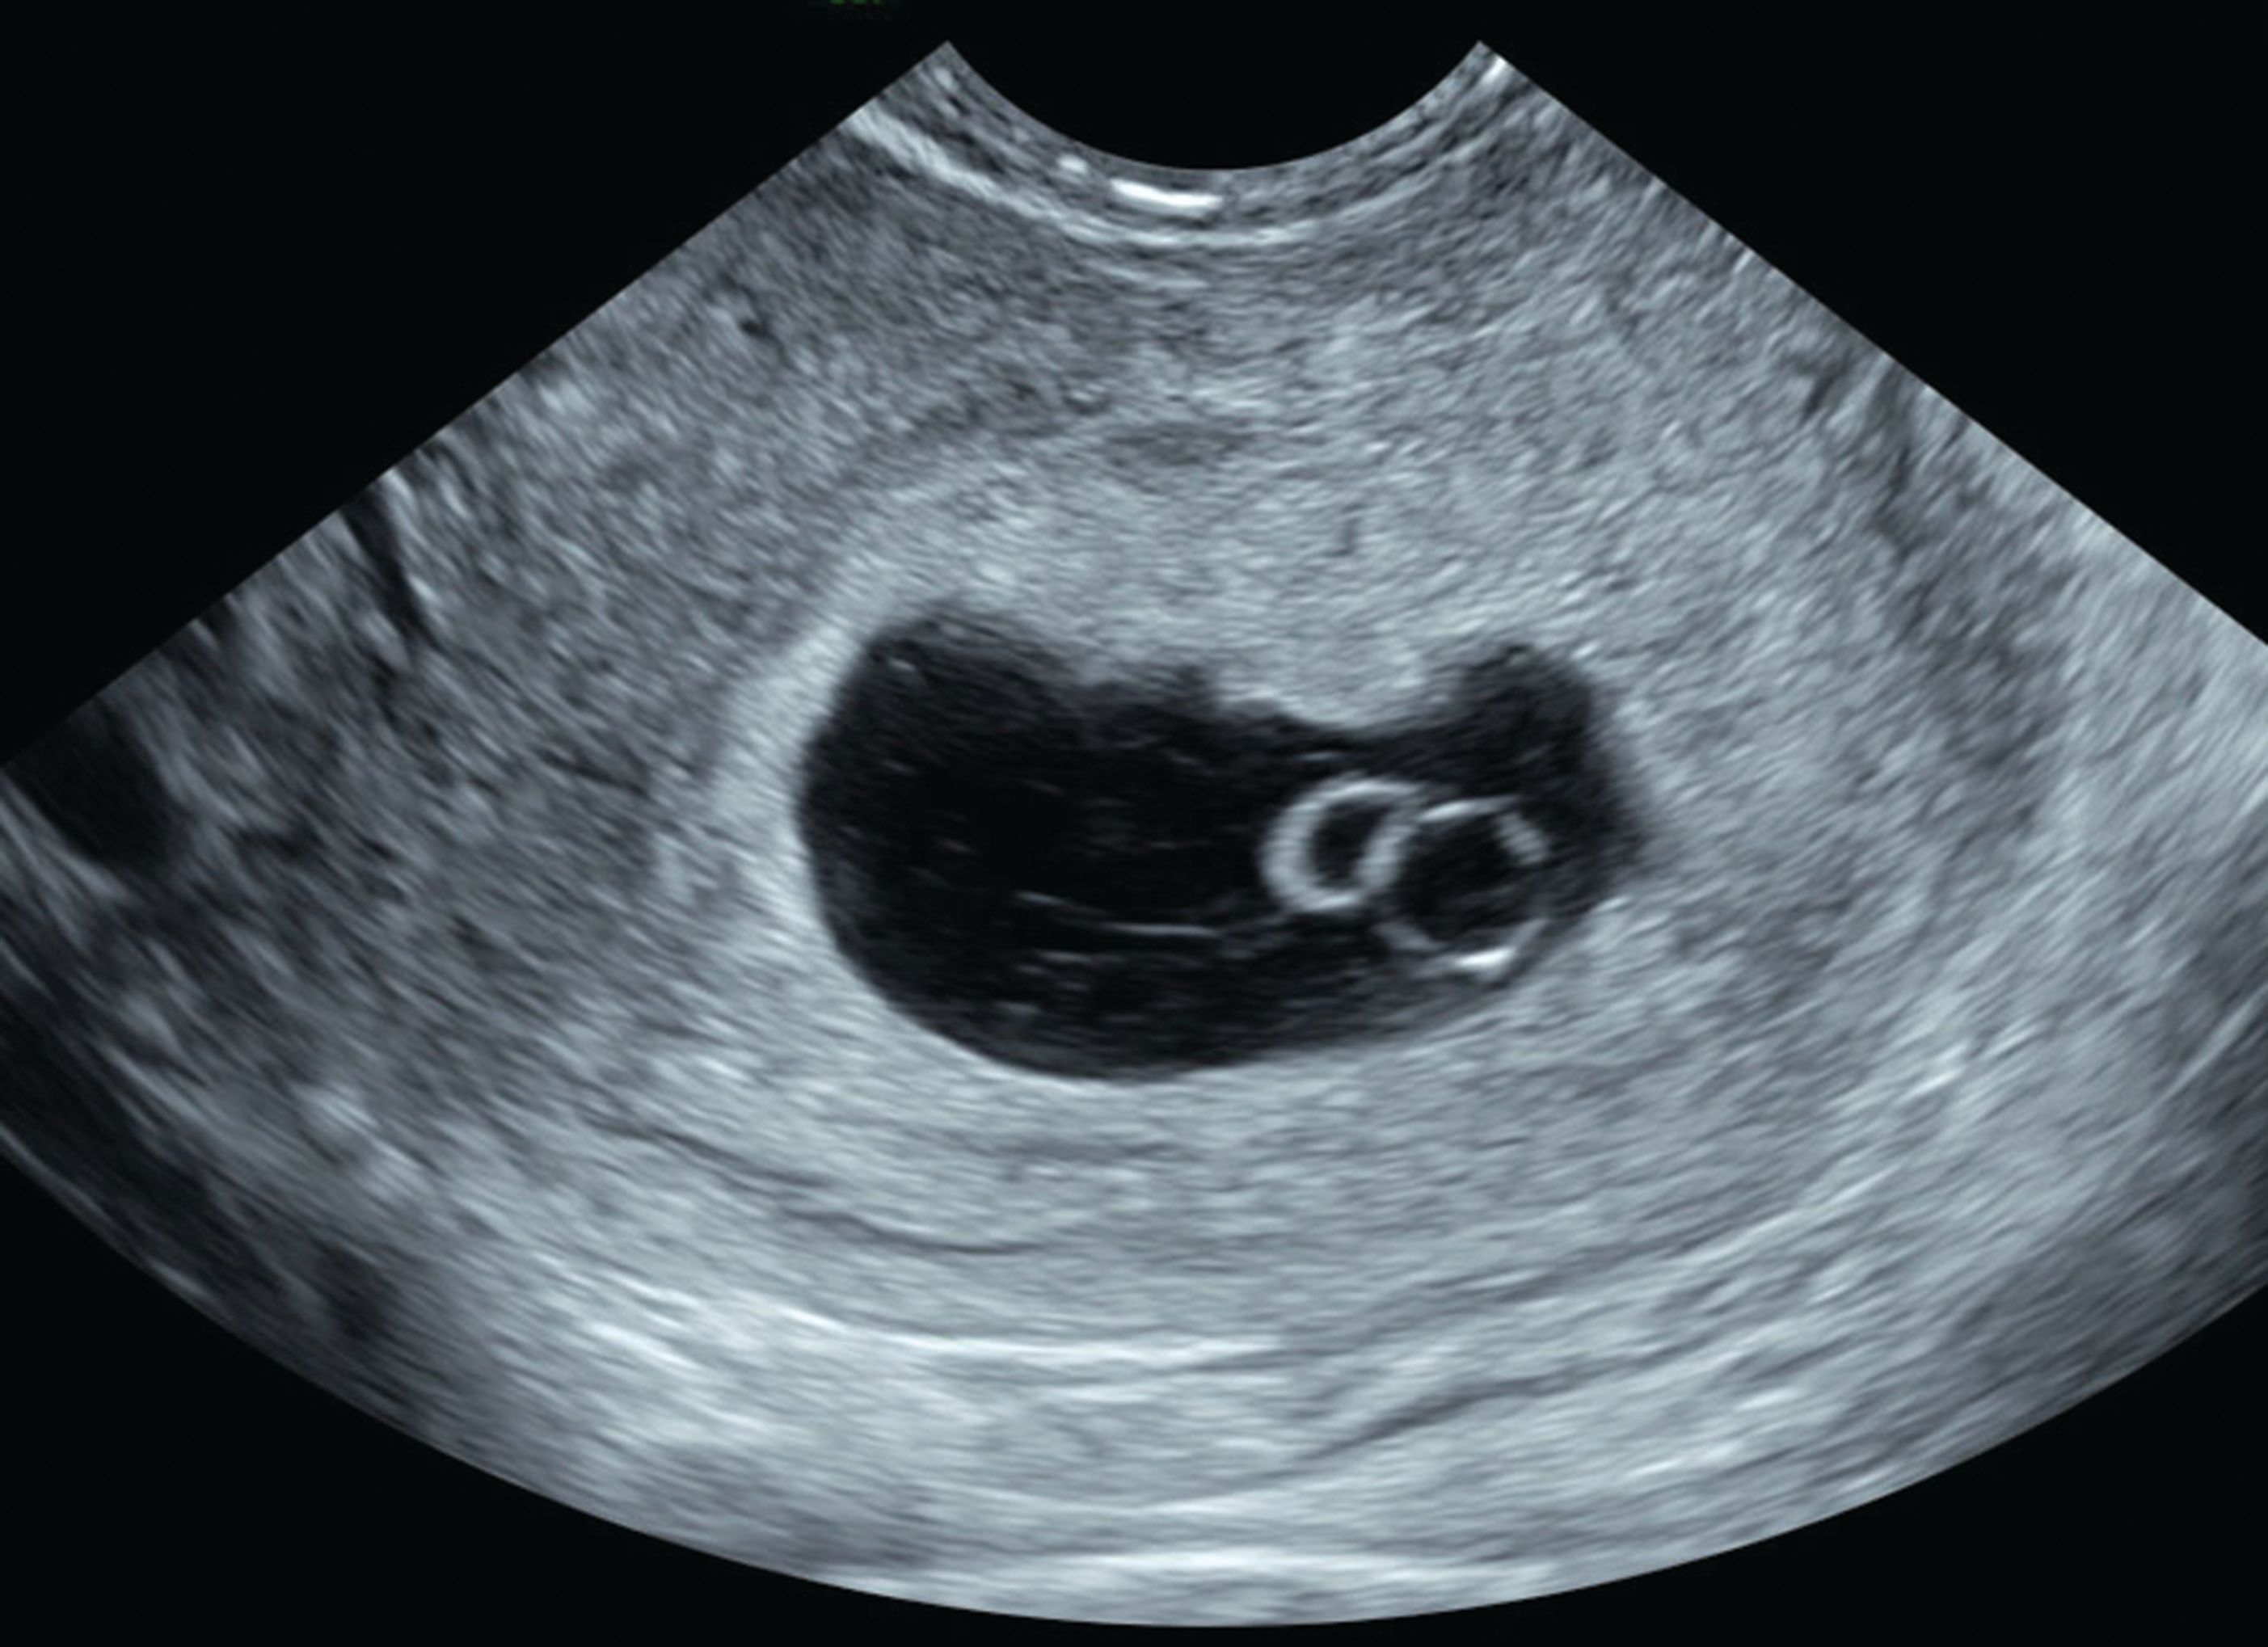 Ultrasound is a Critical Tool of Managing Miscarriage